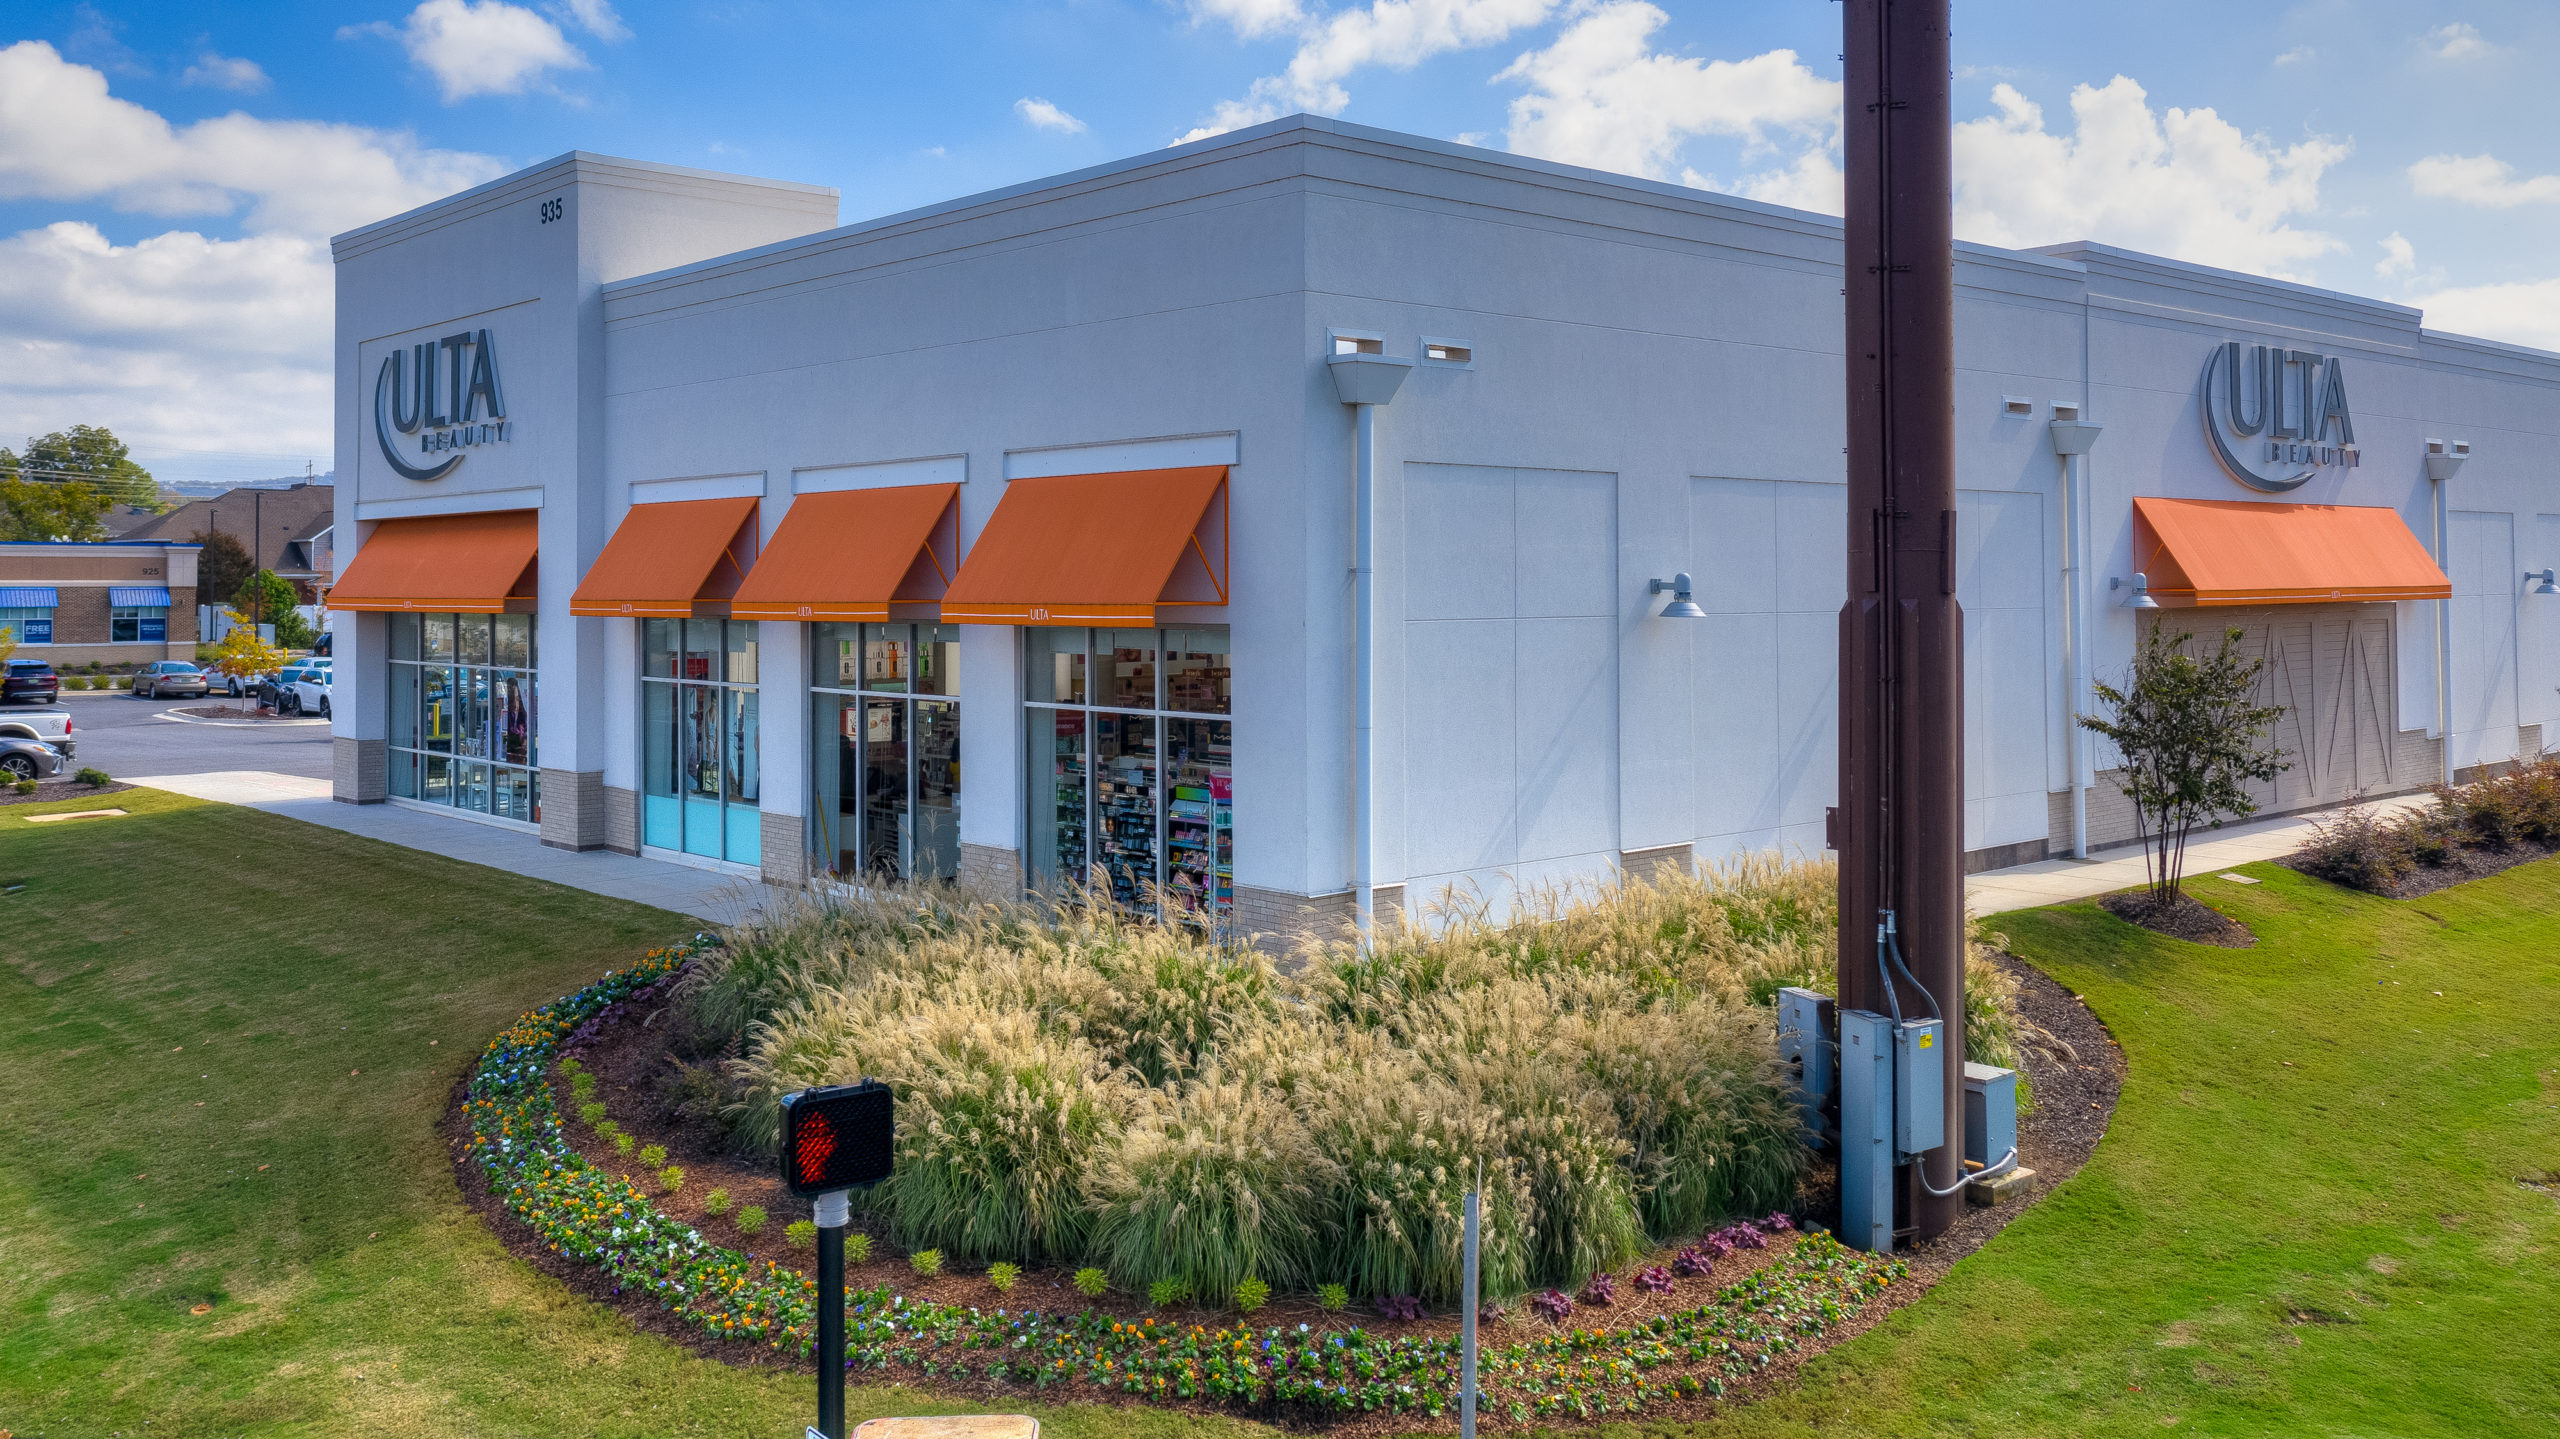 ulta store and landscaping